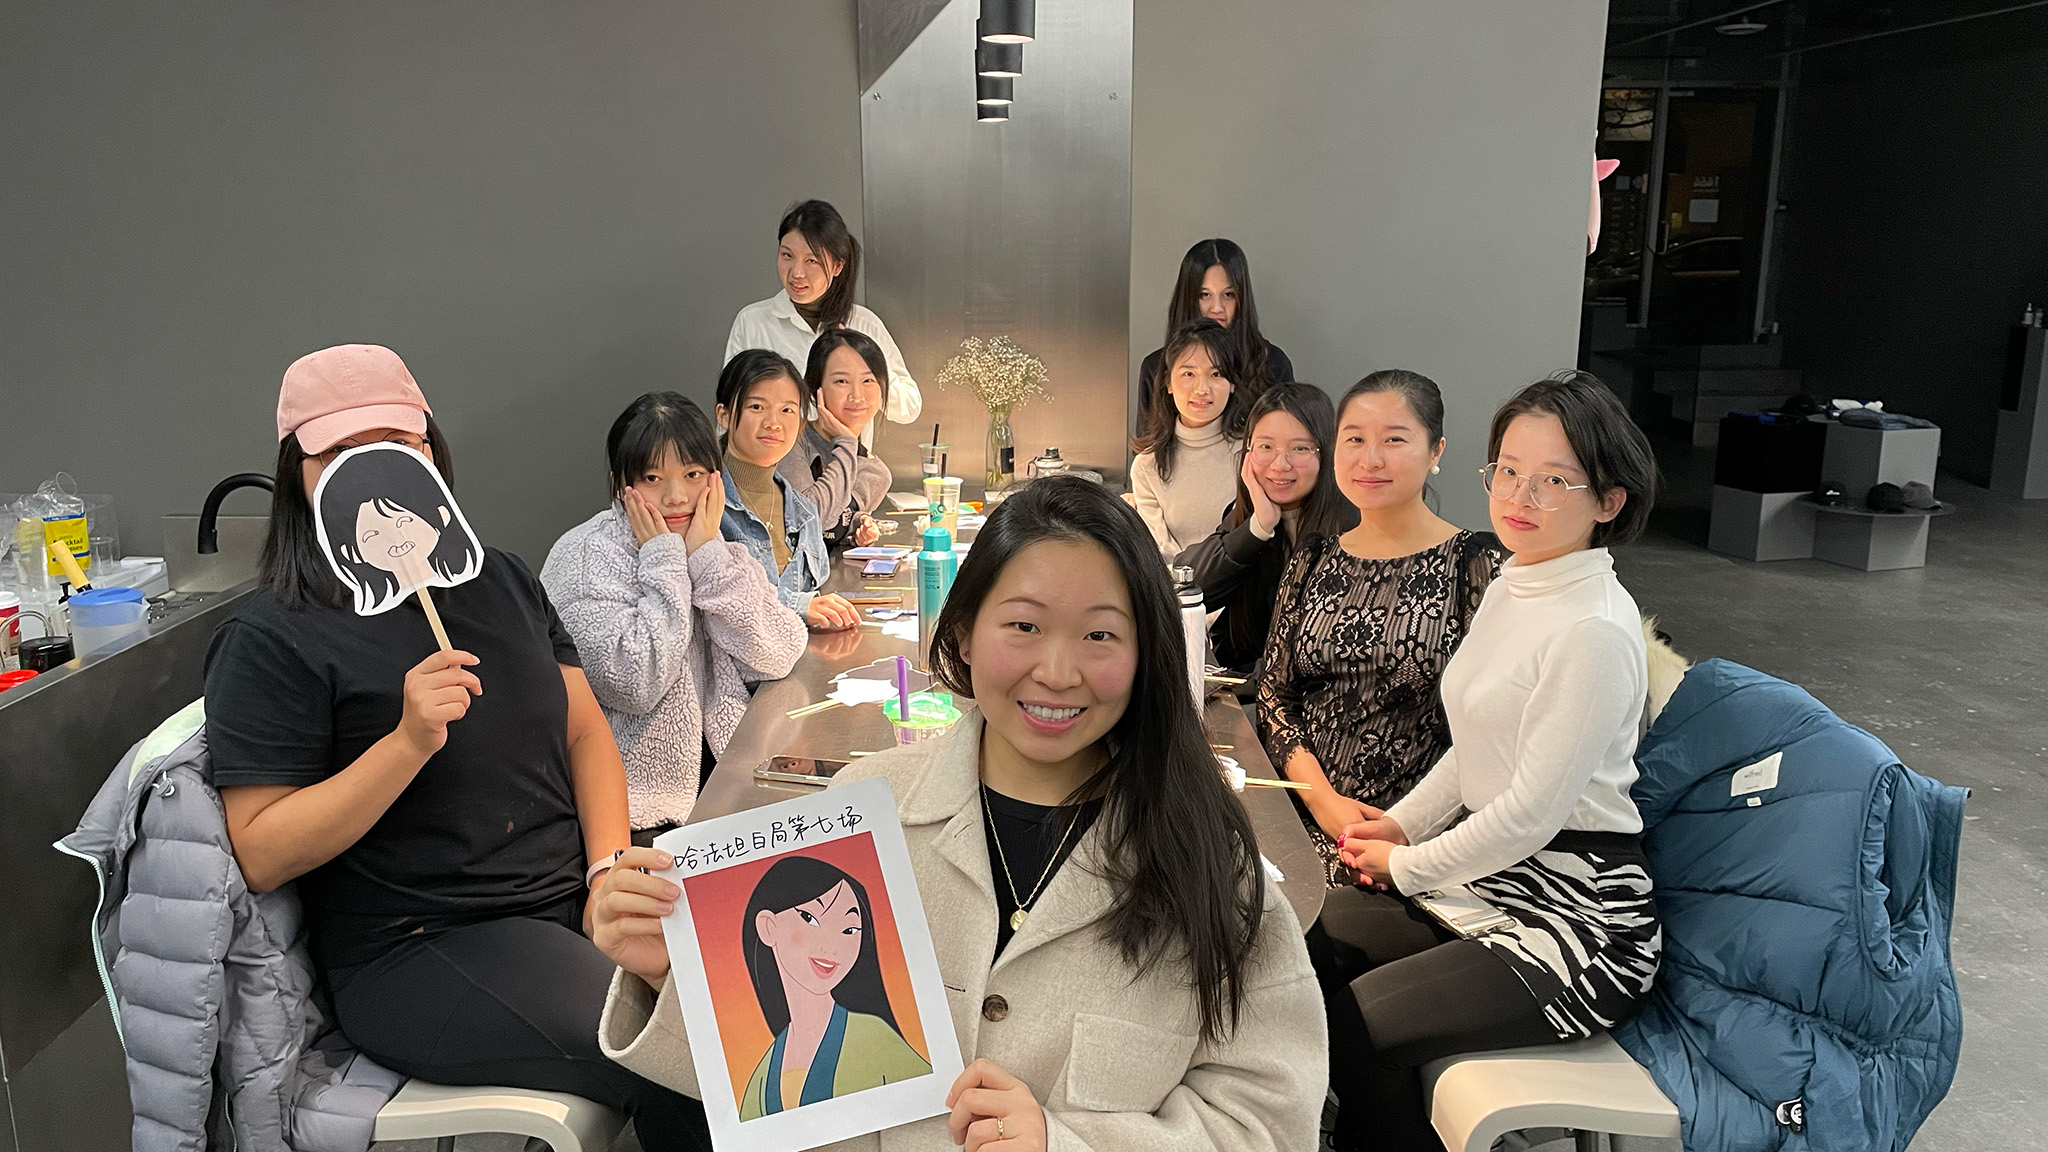 Woman holds image of Mulan with group at table